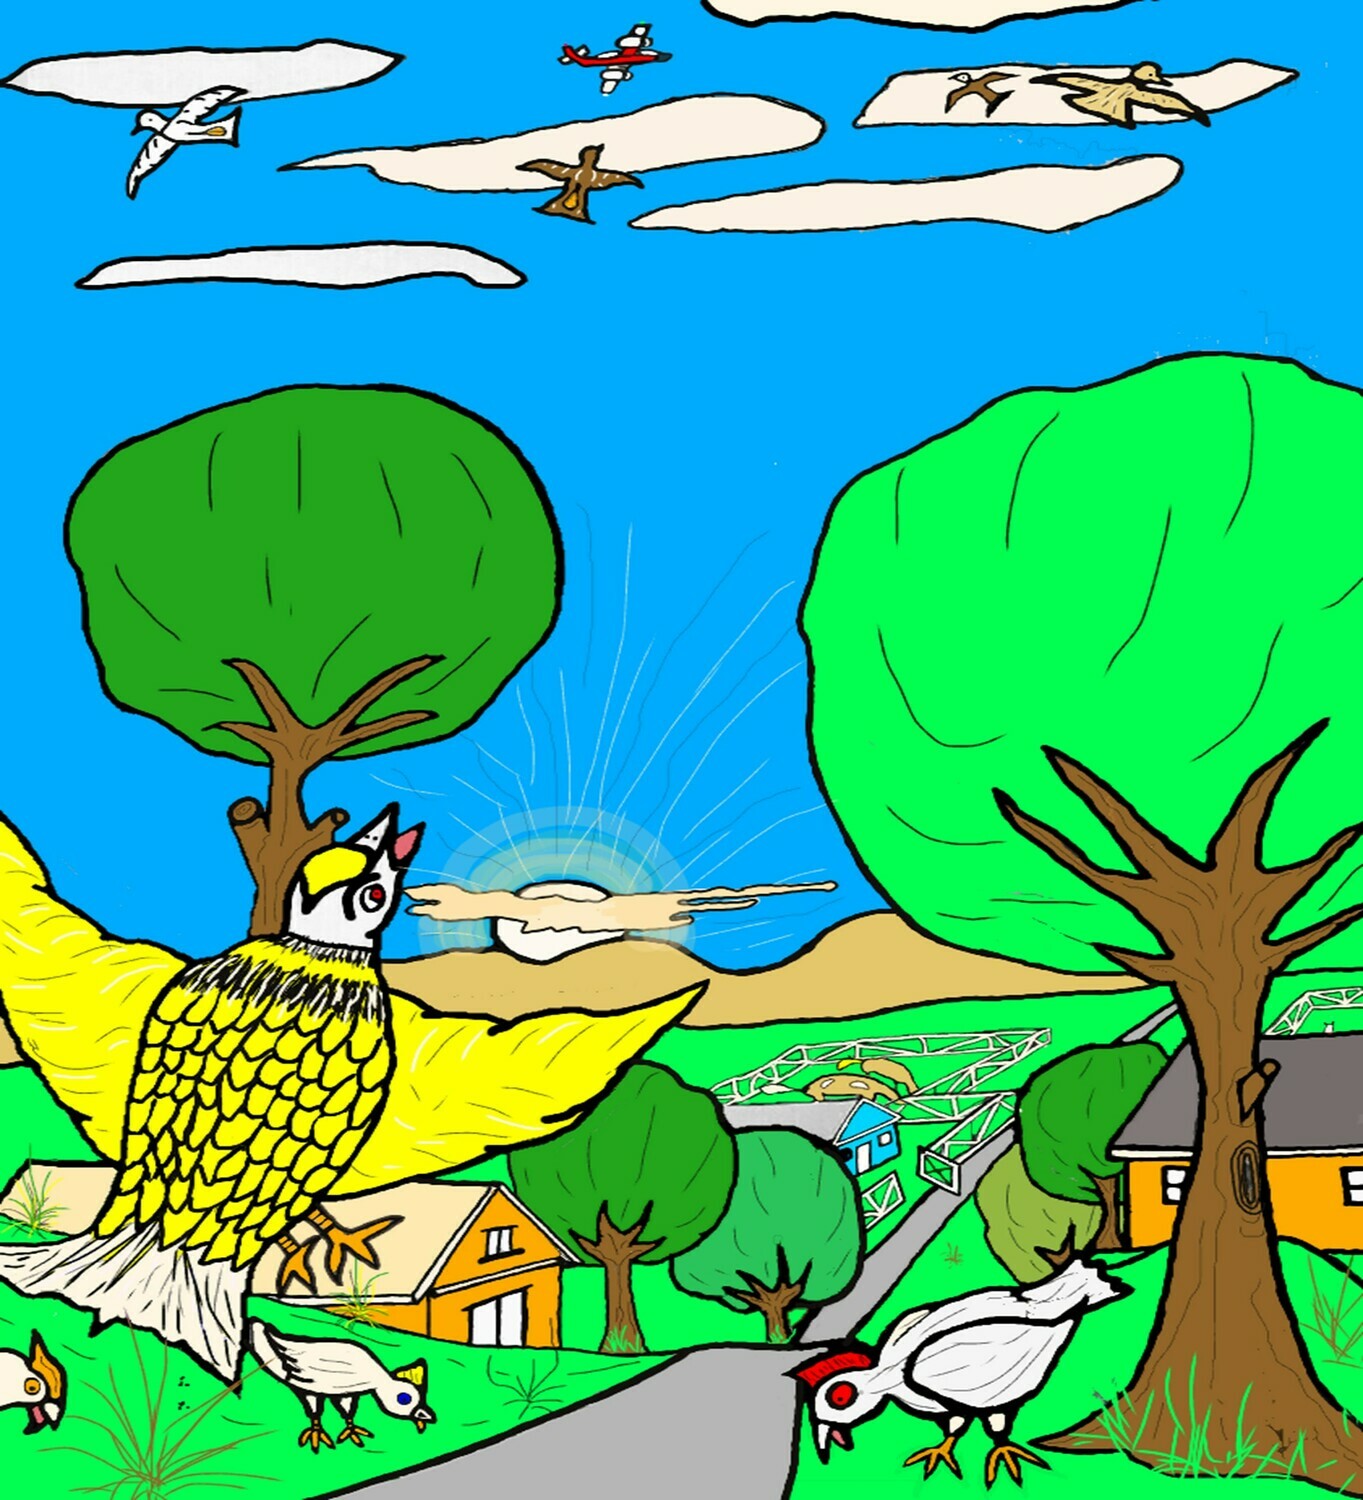 The Chicken Who Dreamed about Flying High above the Trees